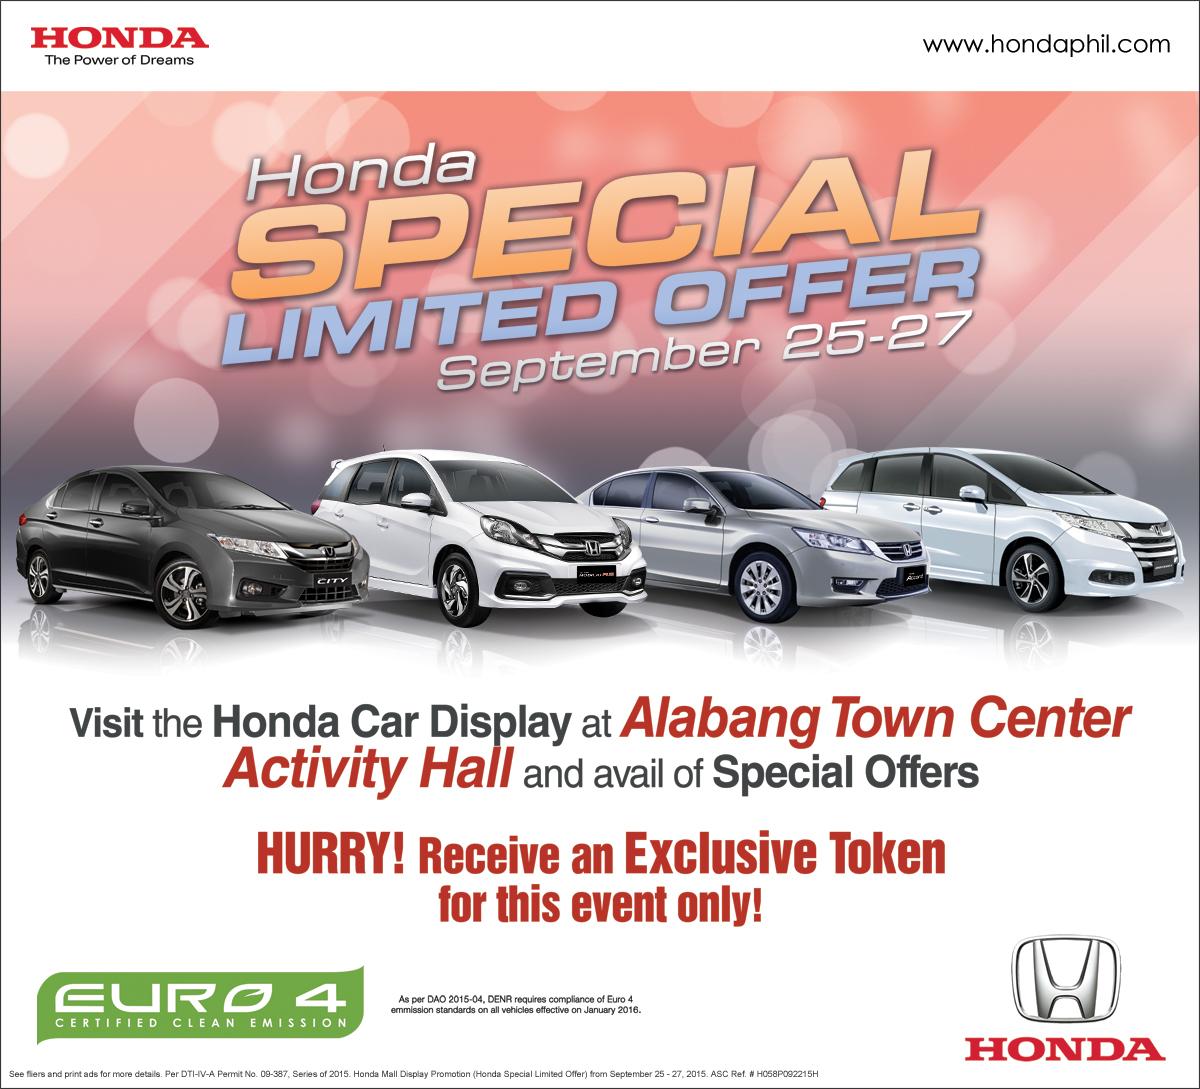 Honda Cars Philippines 2 Days Left See You On September 25 27 15 At Alabang Town Center Activity Hall Visit Http T Co 9bytd6hzqi Http T Co Oxa8nvrzlq